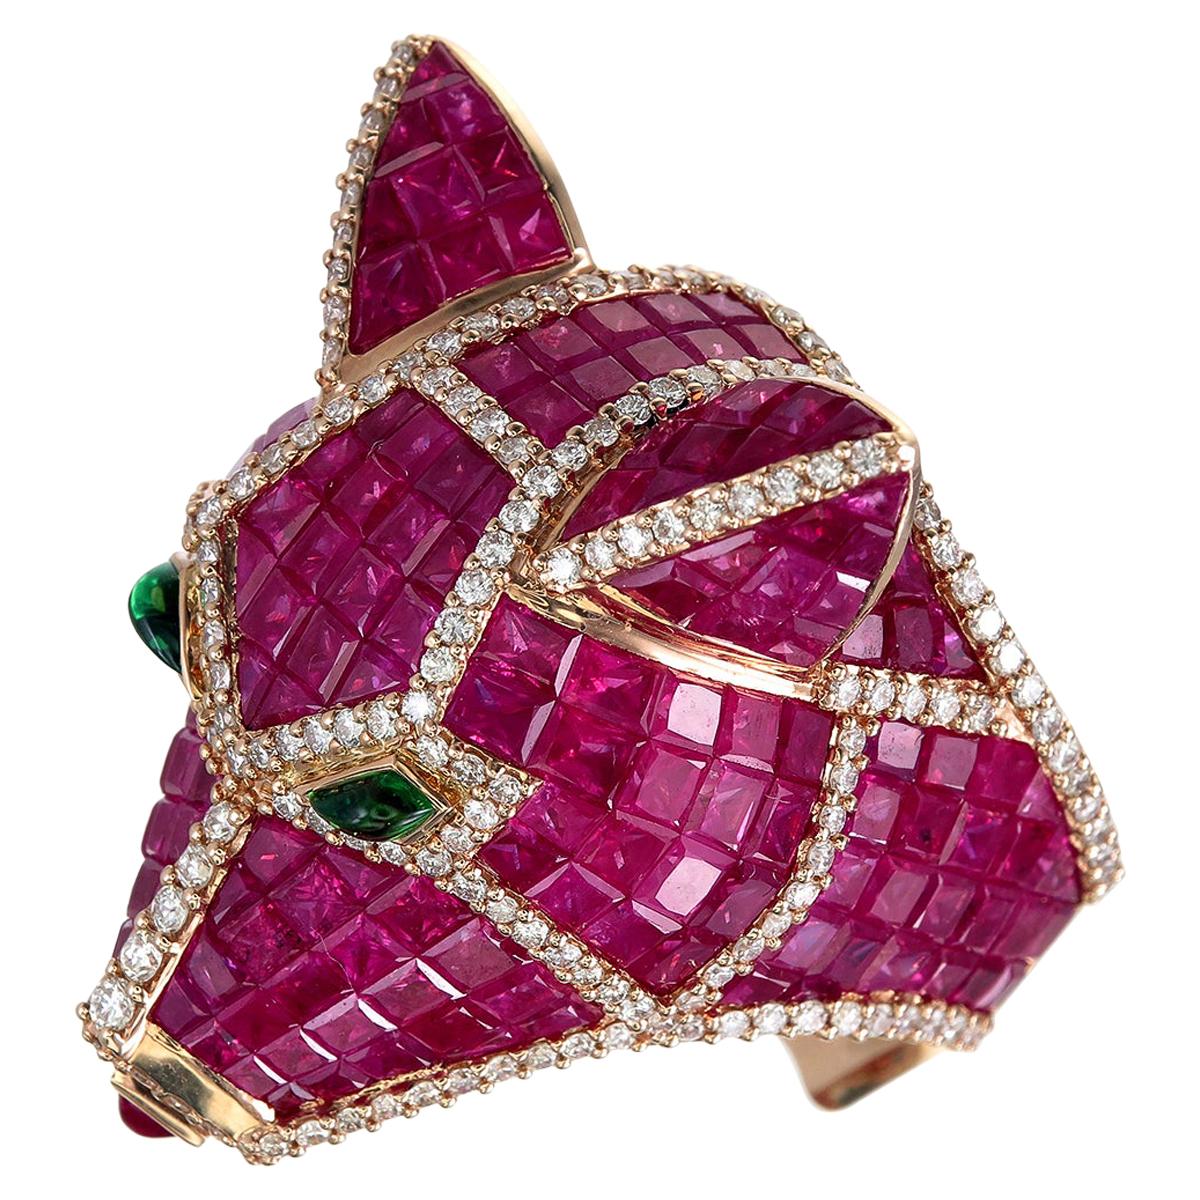 Zorab Creation 44.29-Carat Ruby and Diamond Red Bear Ring